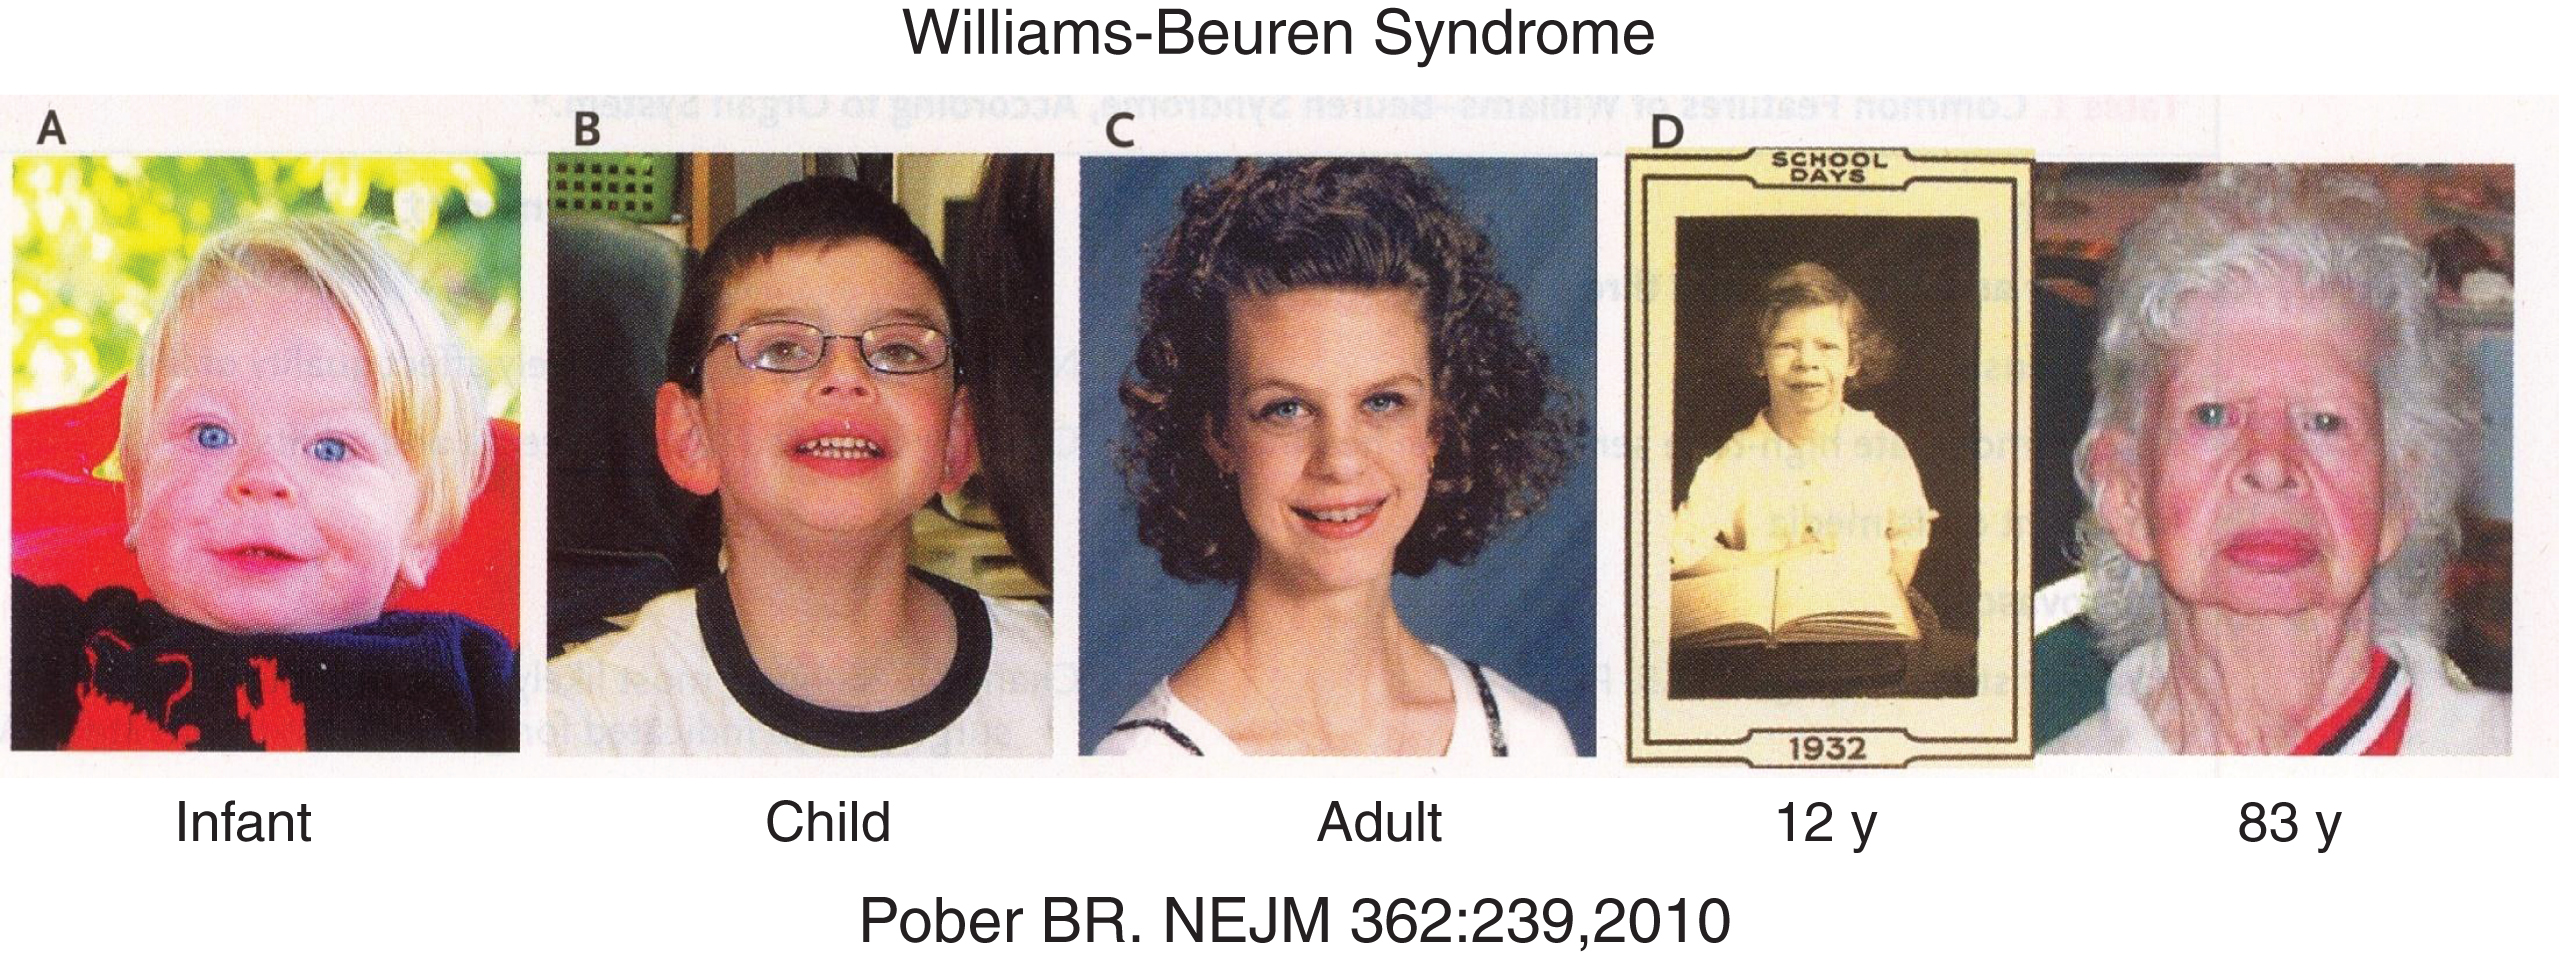 Facial characteristics (pixie-like face with flat nasal bridge, upturned nose, full lips) of a patient with the Williams-Beuren syndrome from infancy to elderly. (Reproduced with permission from Pober BR. Williams-Beuren syndrome. N Engl J Med 362:239-252,2010.)